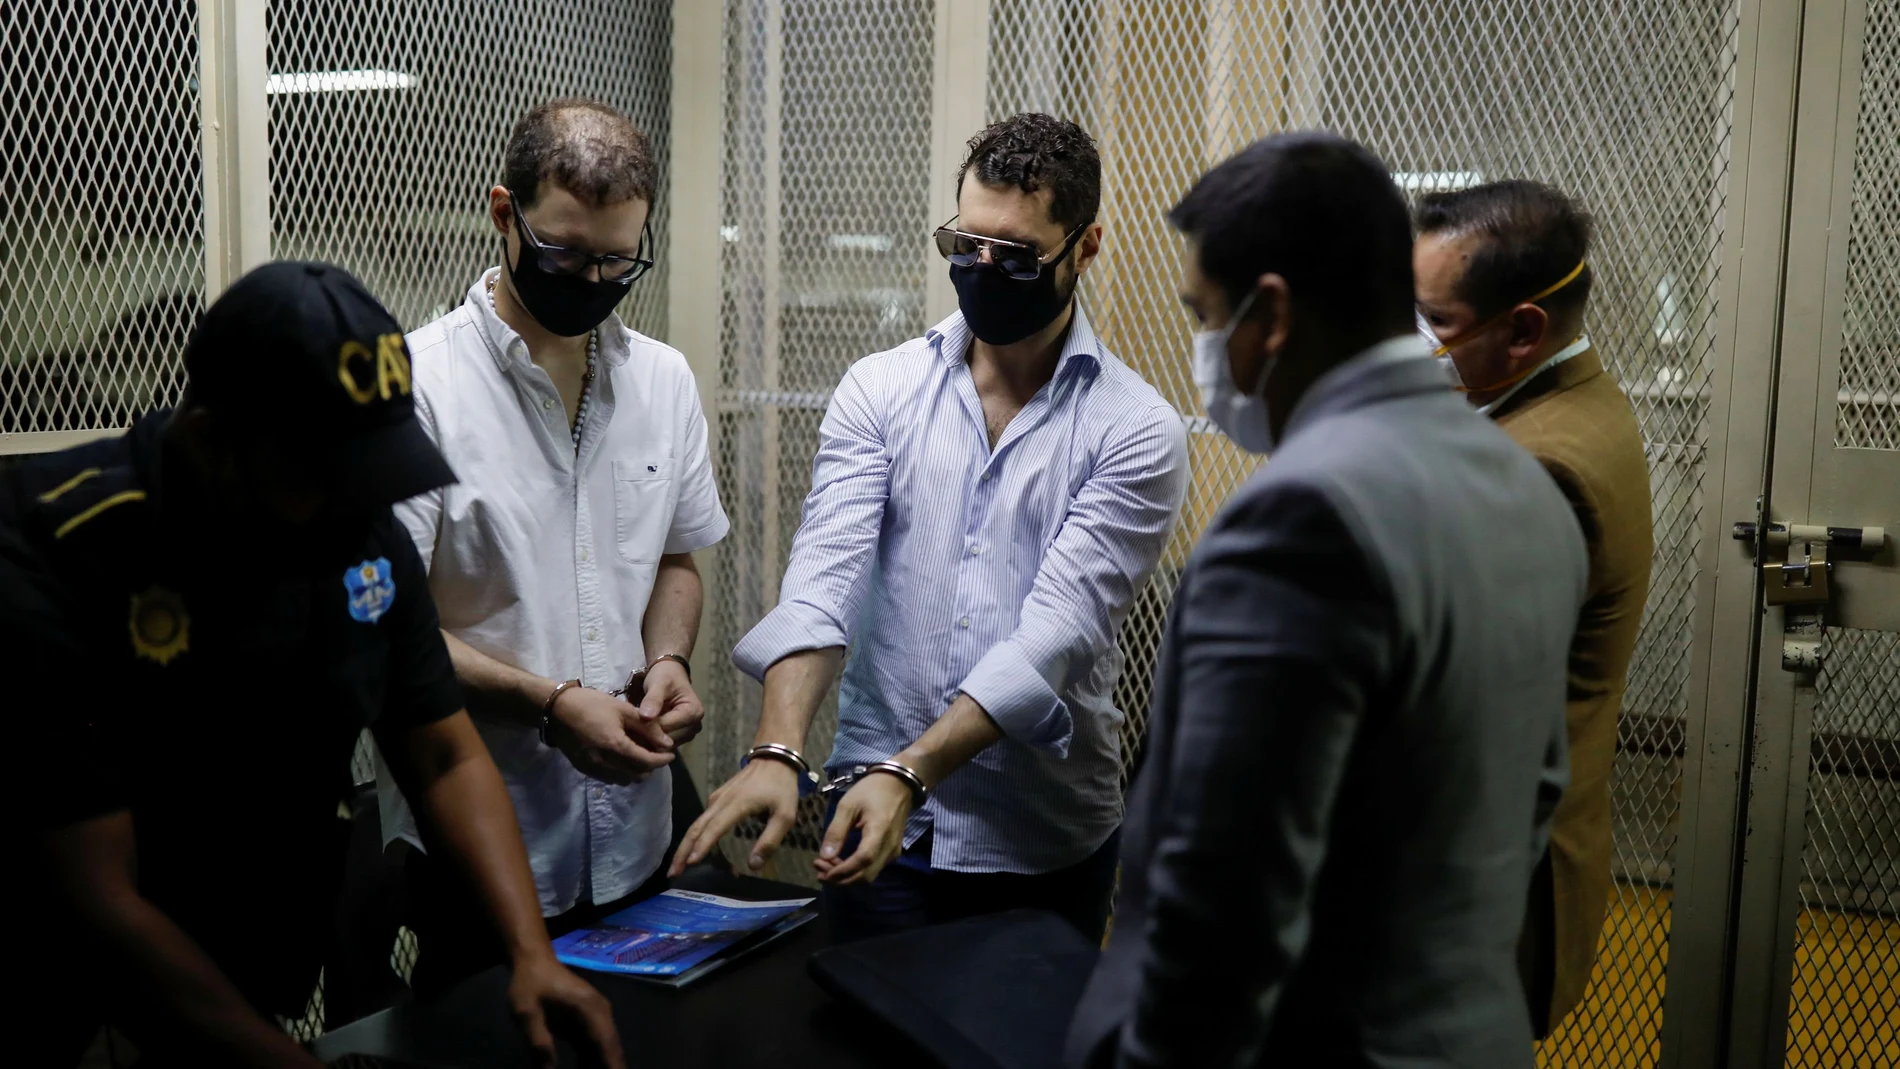 Ricardo (2nd L) and Luis Enrique, sons of former Panamanian President Ricardo Martinelli, are seen with their lawyers and a police officer after being detained to face extradition to the U.S. on money laundering charges, in Guatemala City